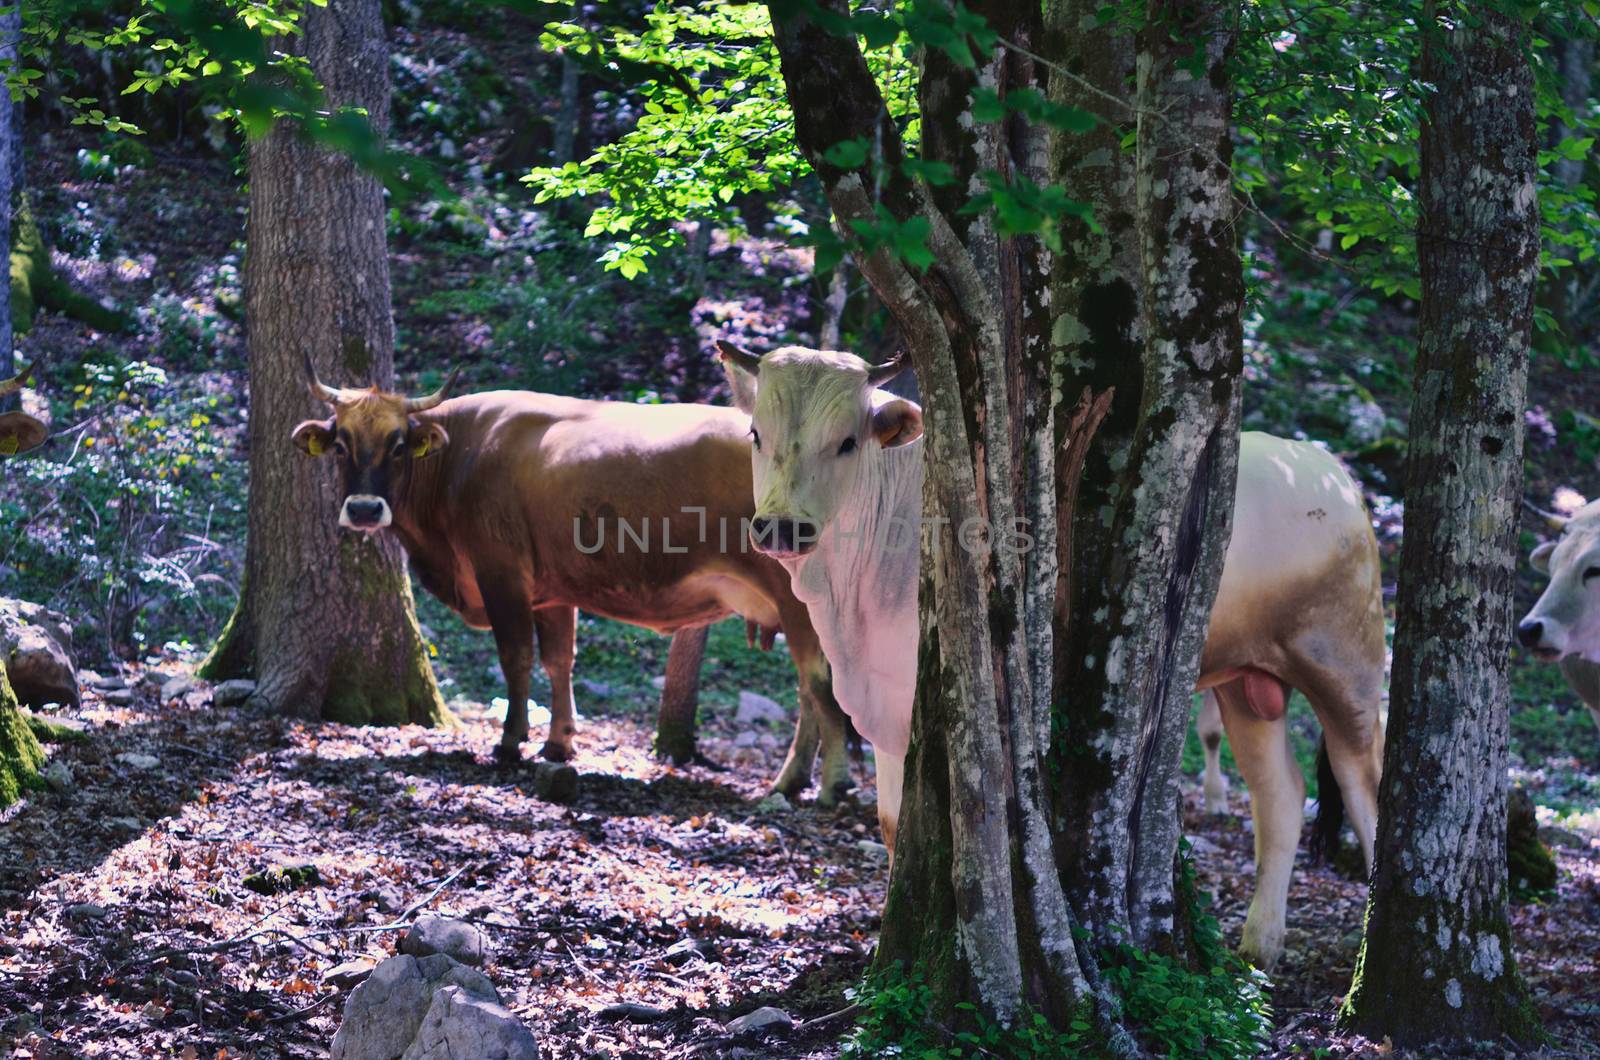 Grazing cows. Mountain forest, Italy